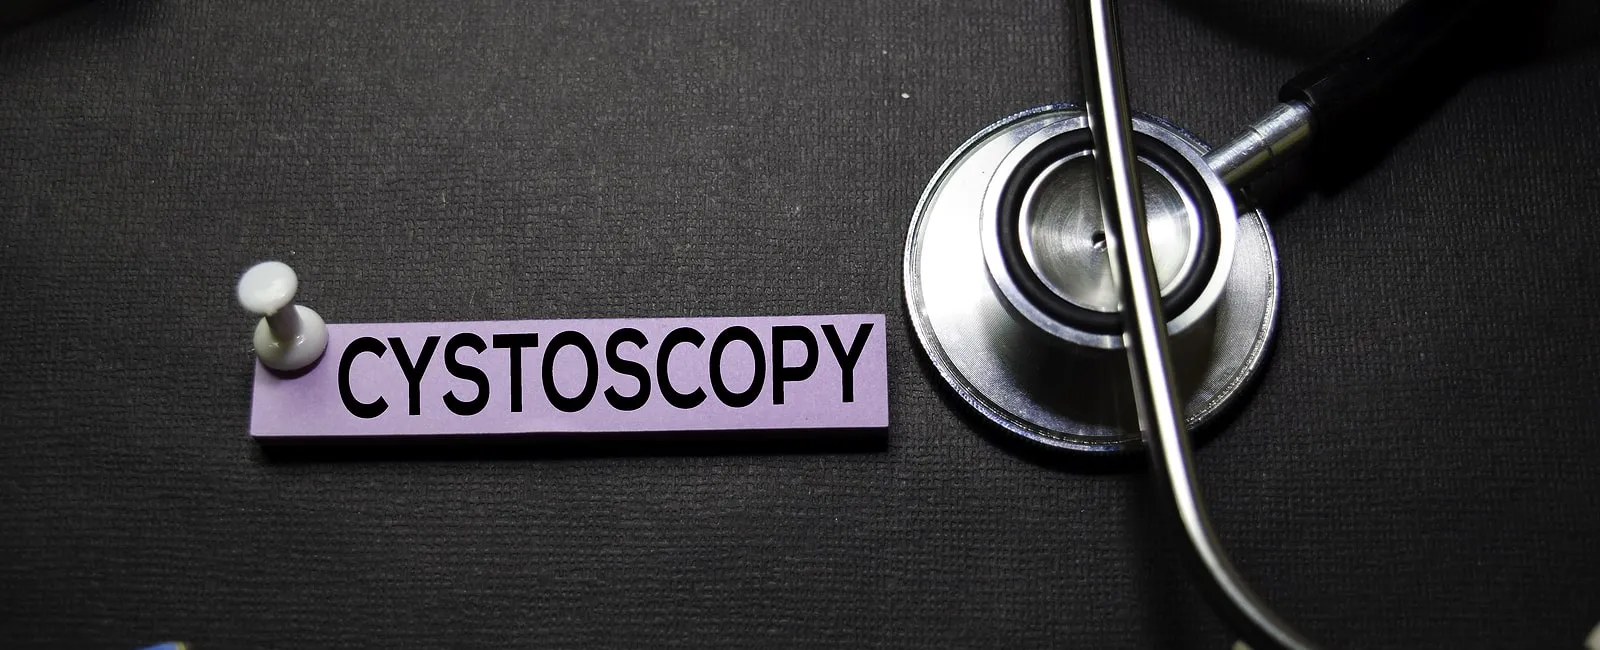 What You Should Know About a Cystoscopy